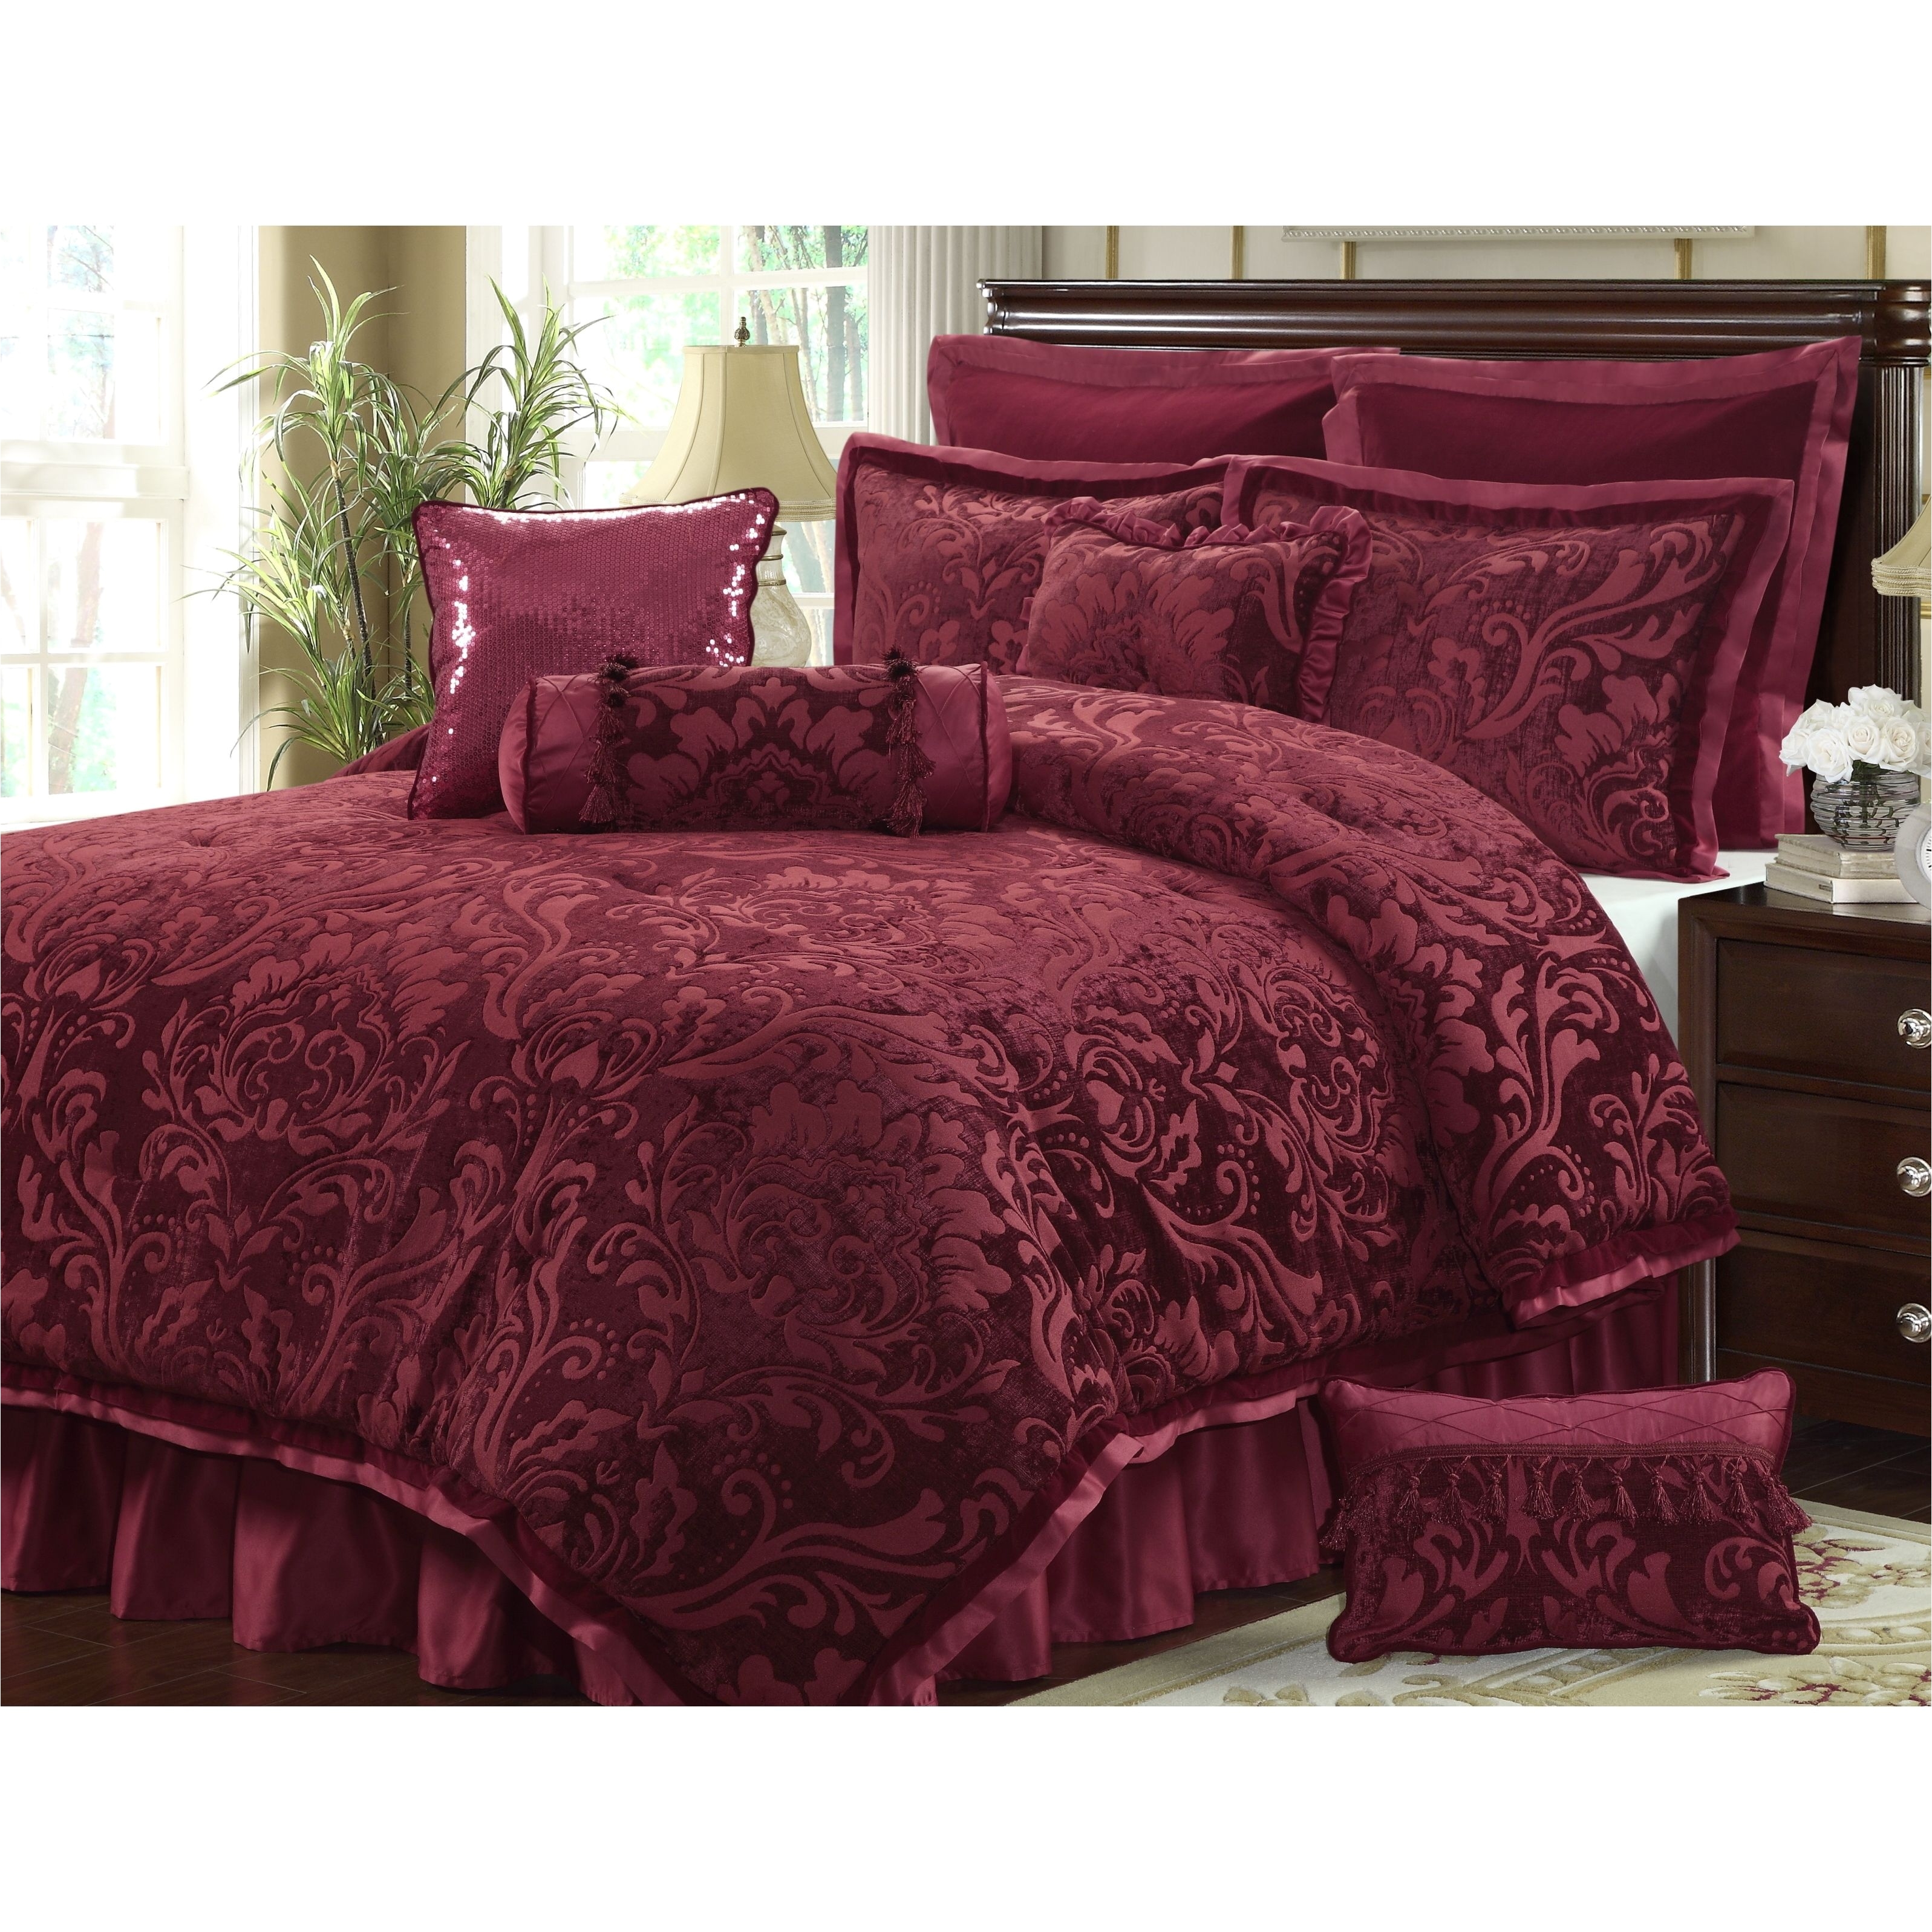 accentuate your bedroom with the waldorf 10 piece bedding ensemble in a wine red finish